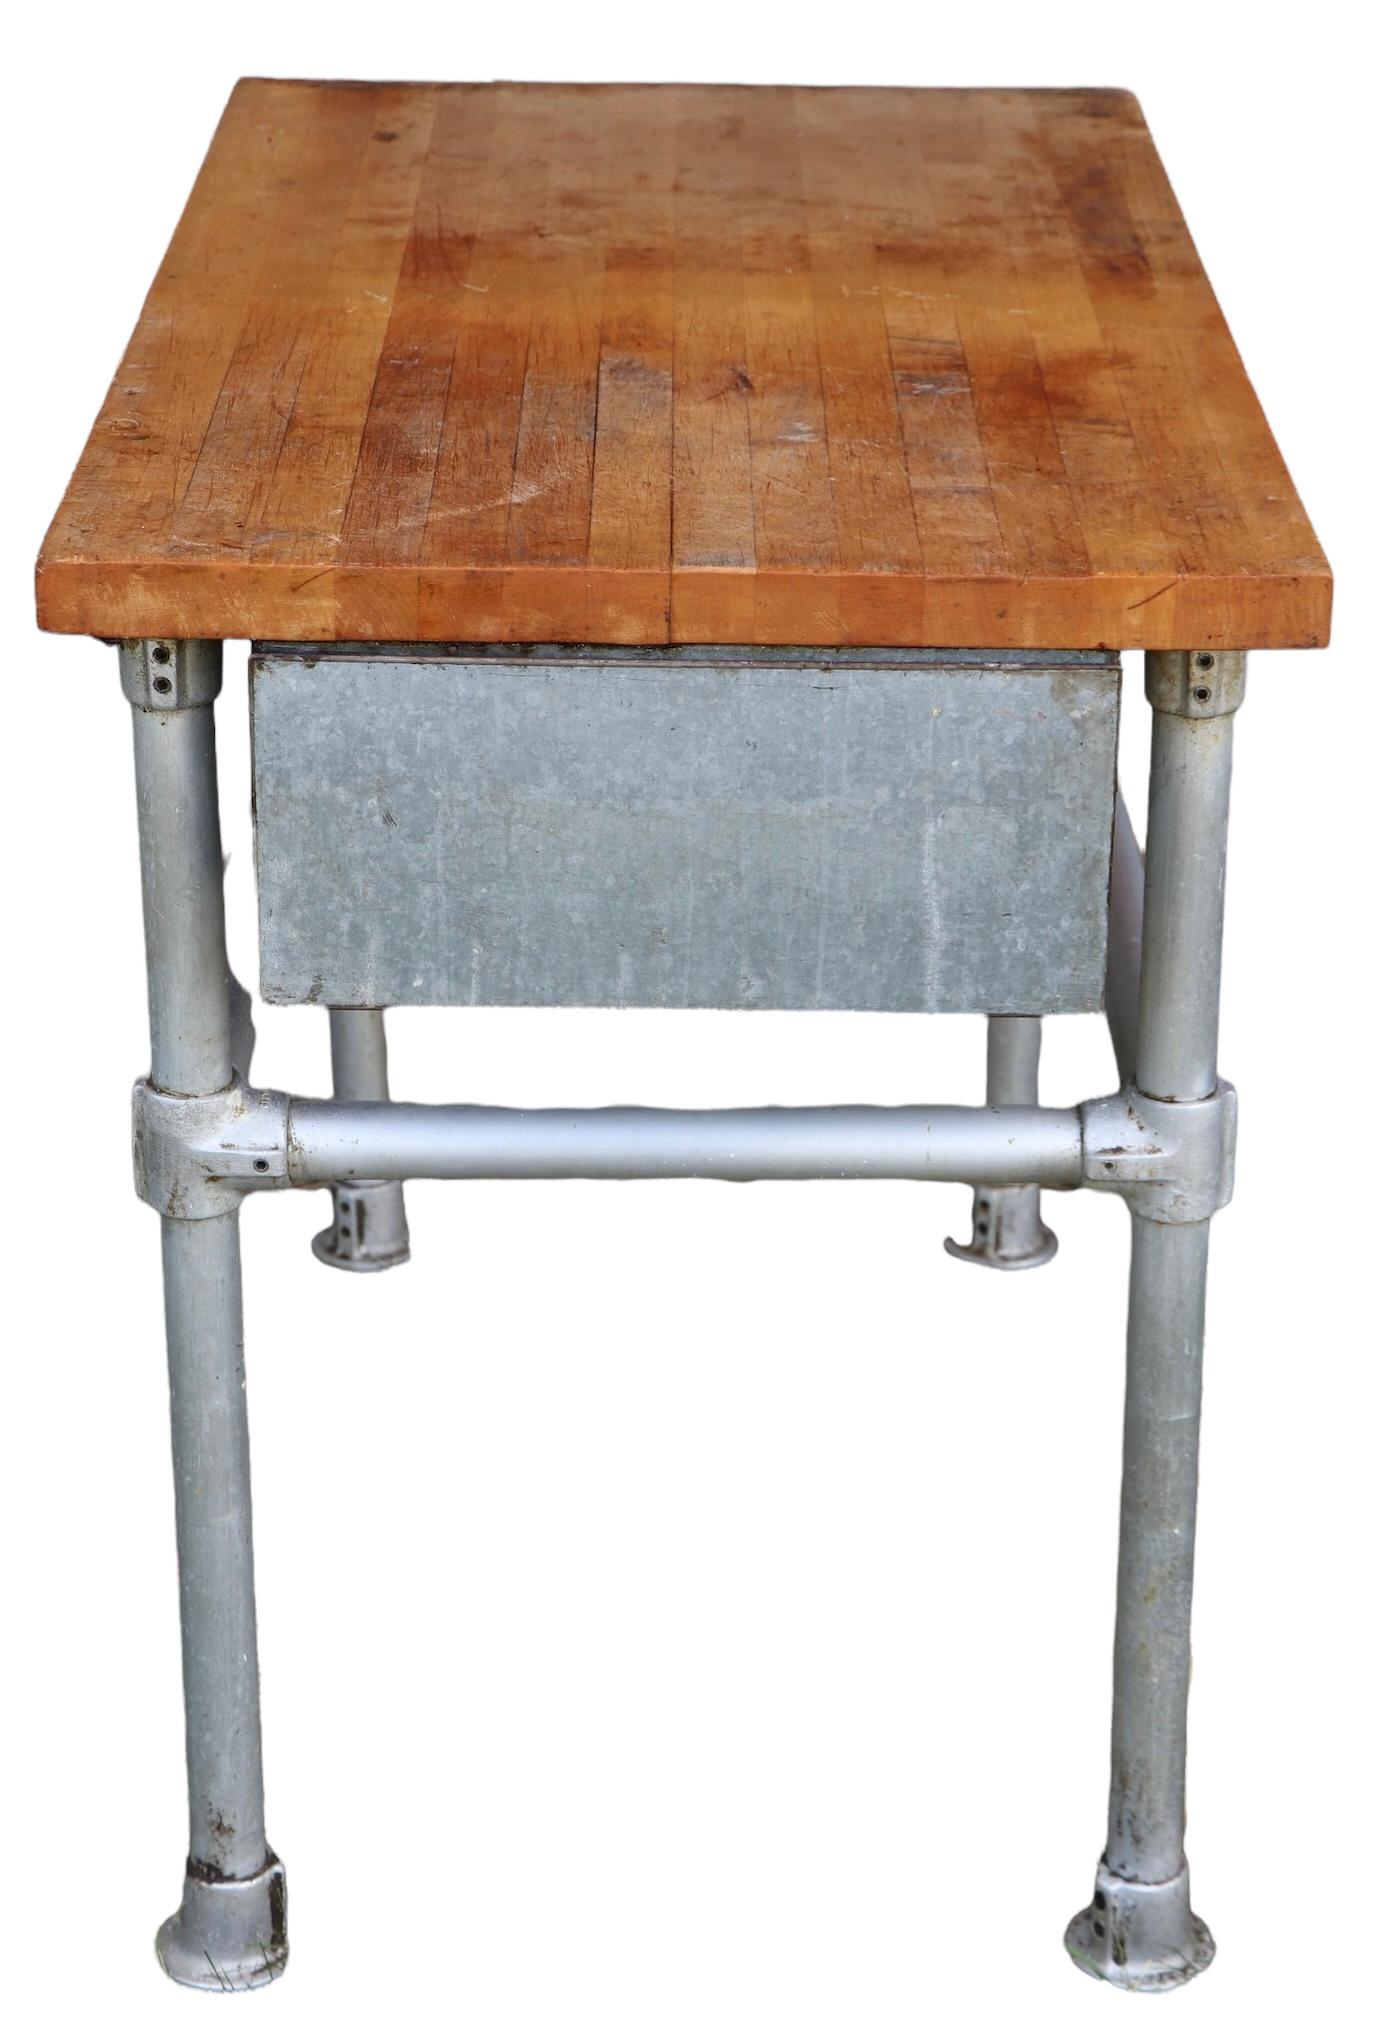 Commercial Butcher Block and Iron Work Table with Storage Drawer  9